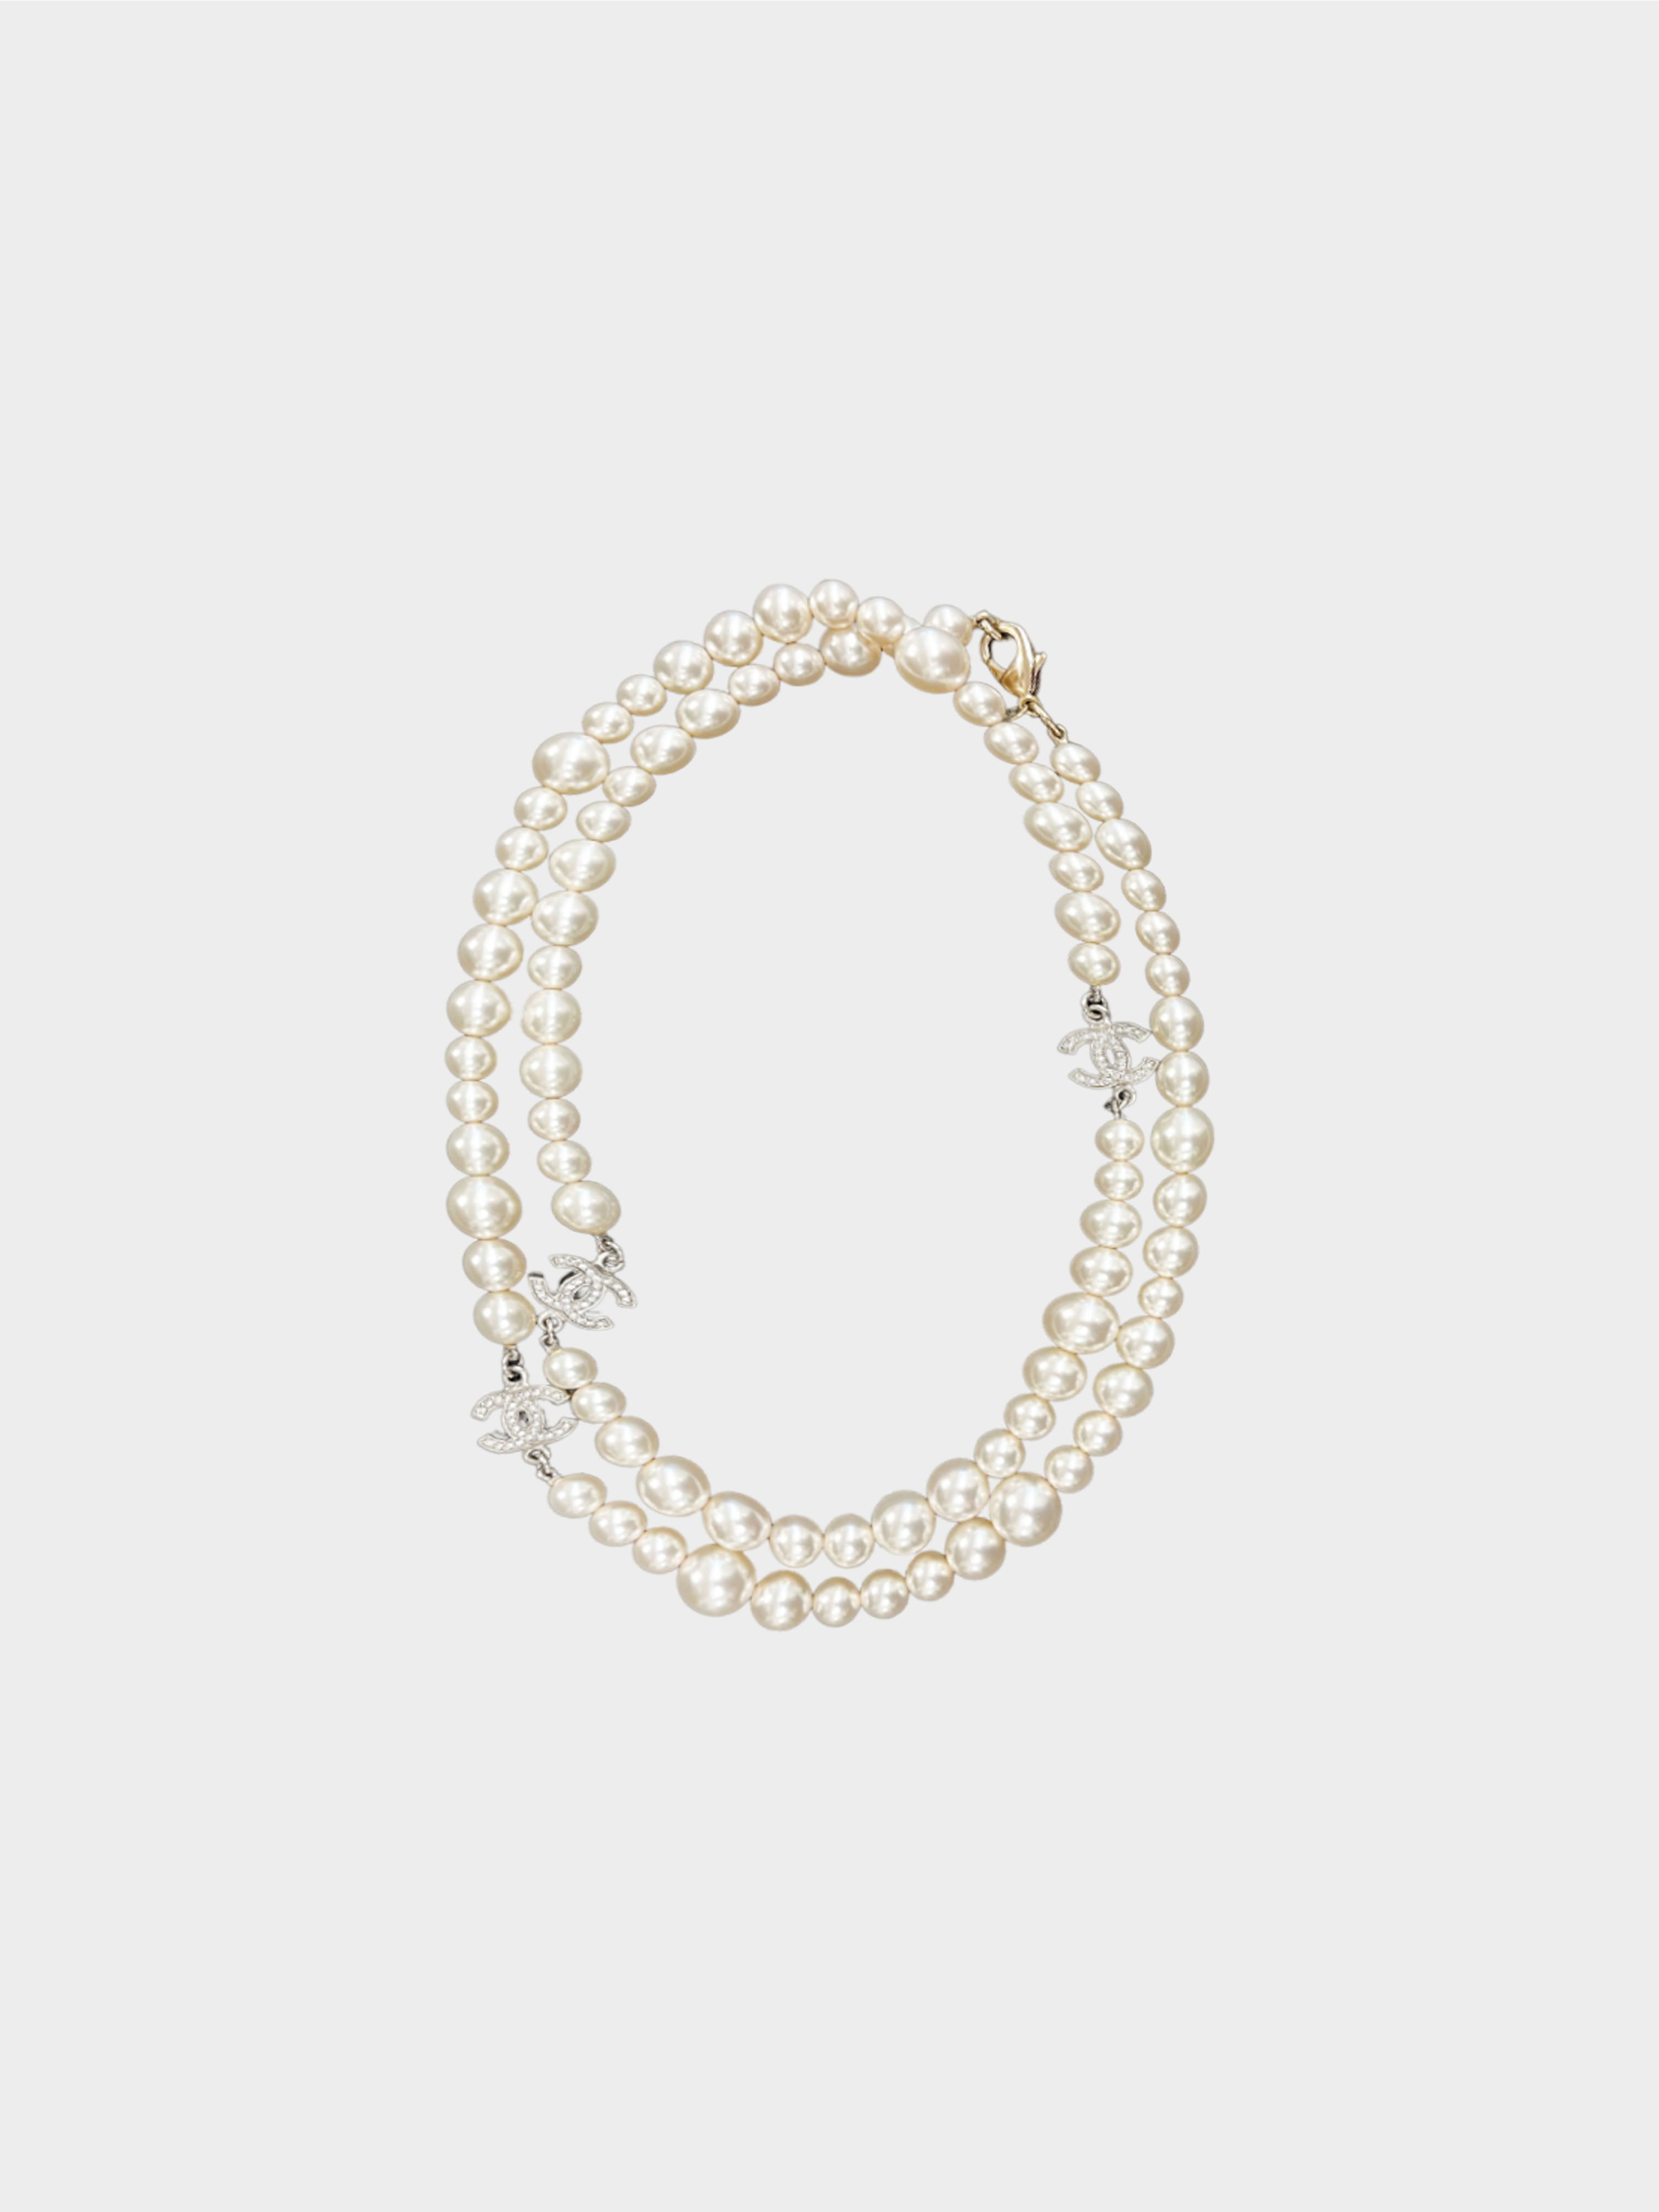 Chanel Fall 2013 Faux Pearl Double Necklace